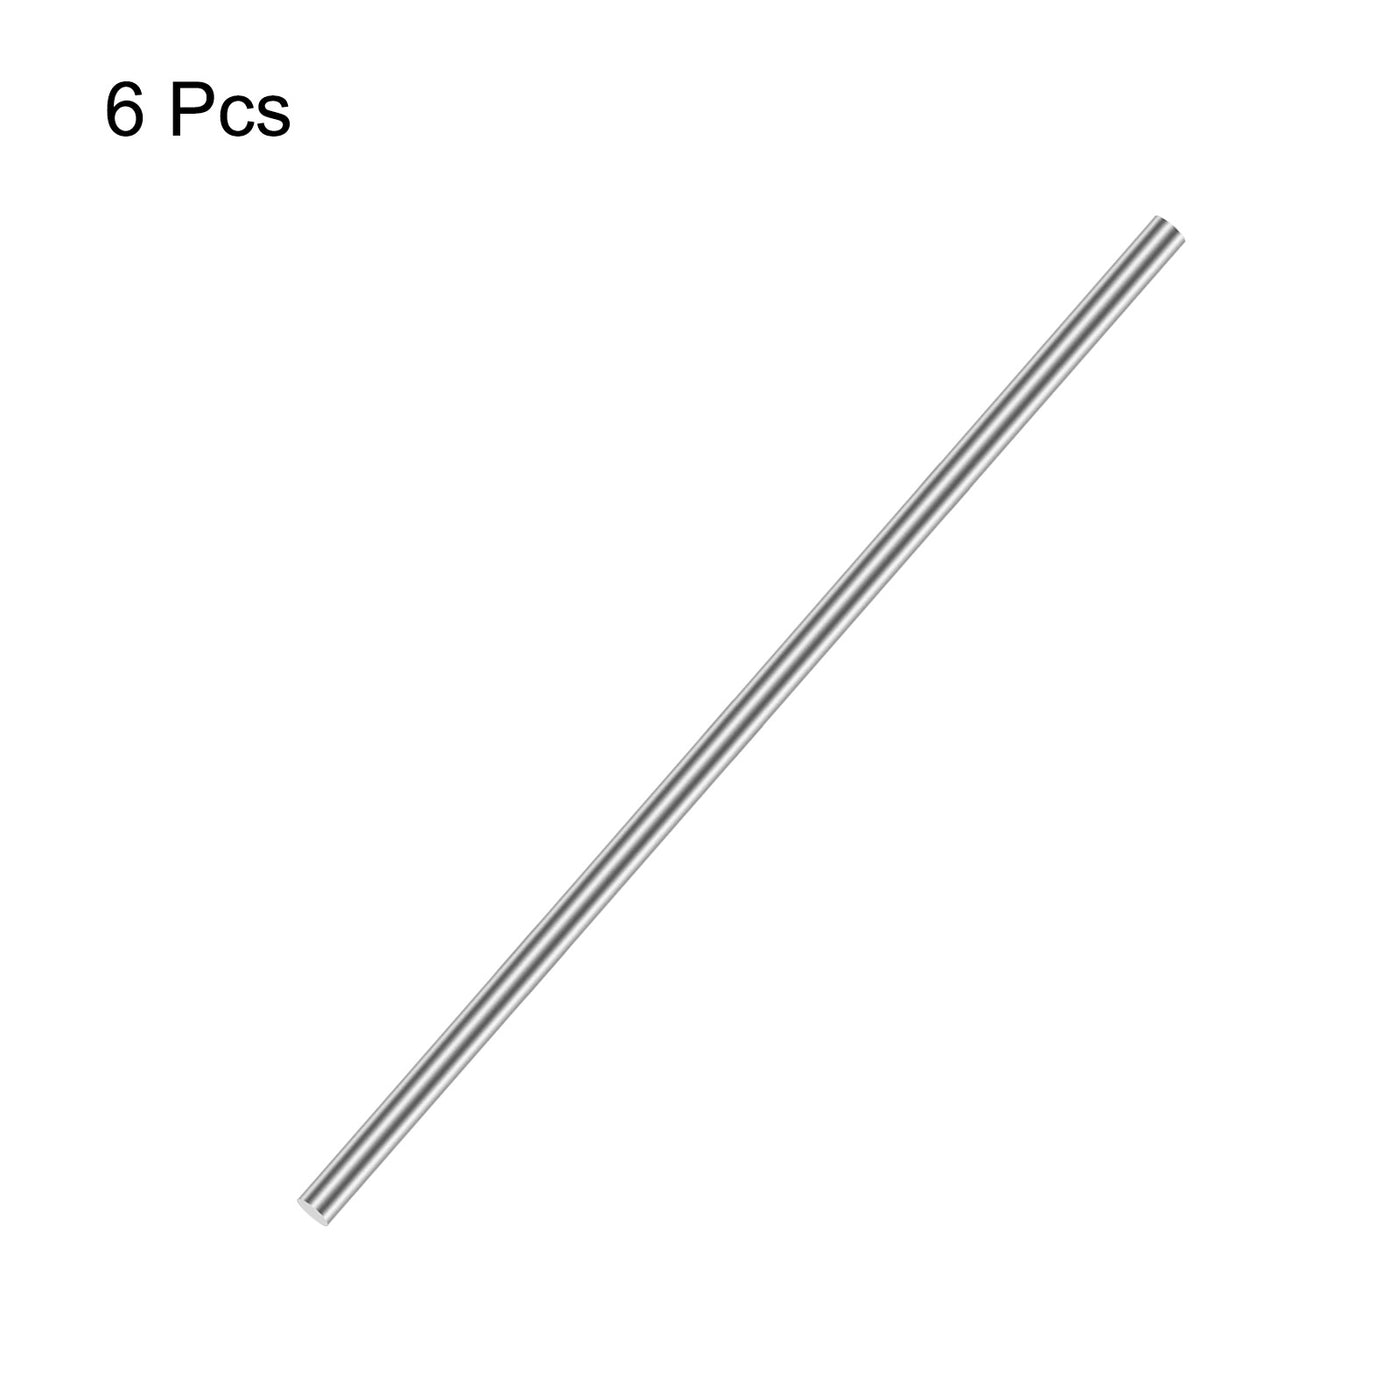 uxcell Uxcell 3mm x 300mm(1/8" x 12") 304 Stainless Steel Solid Round Rod for DIY Craft - 6pcs